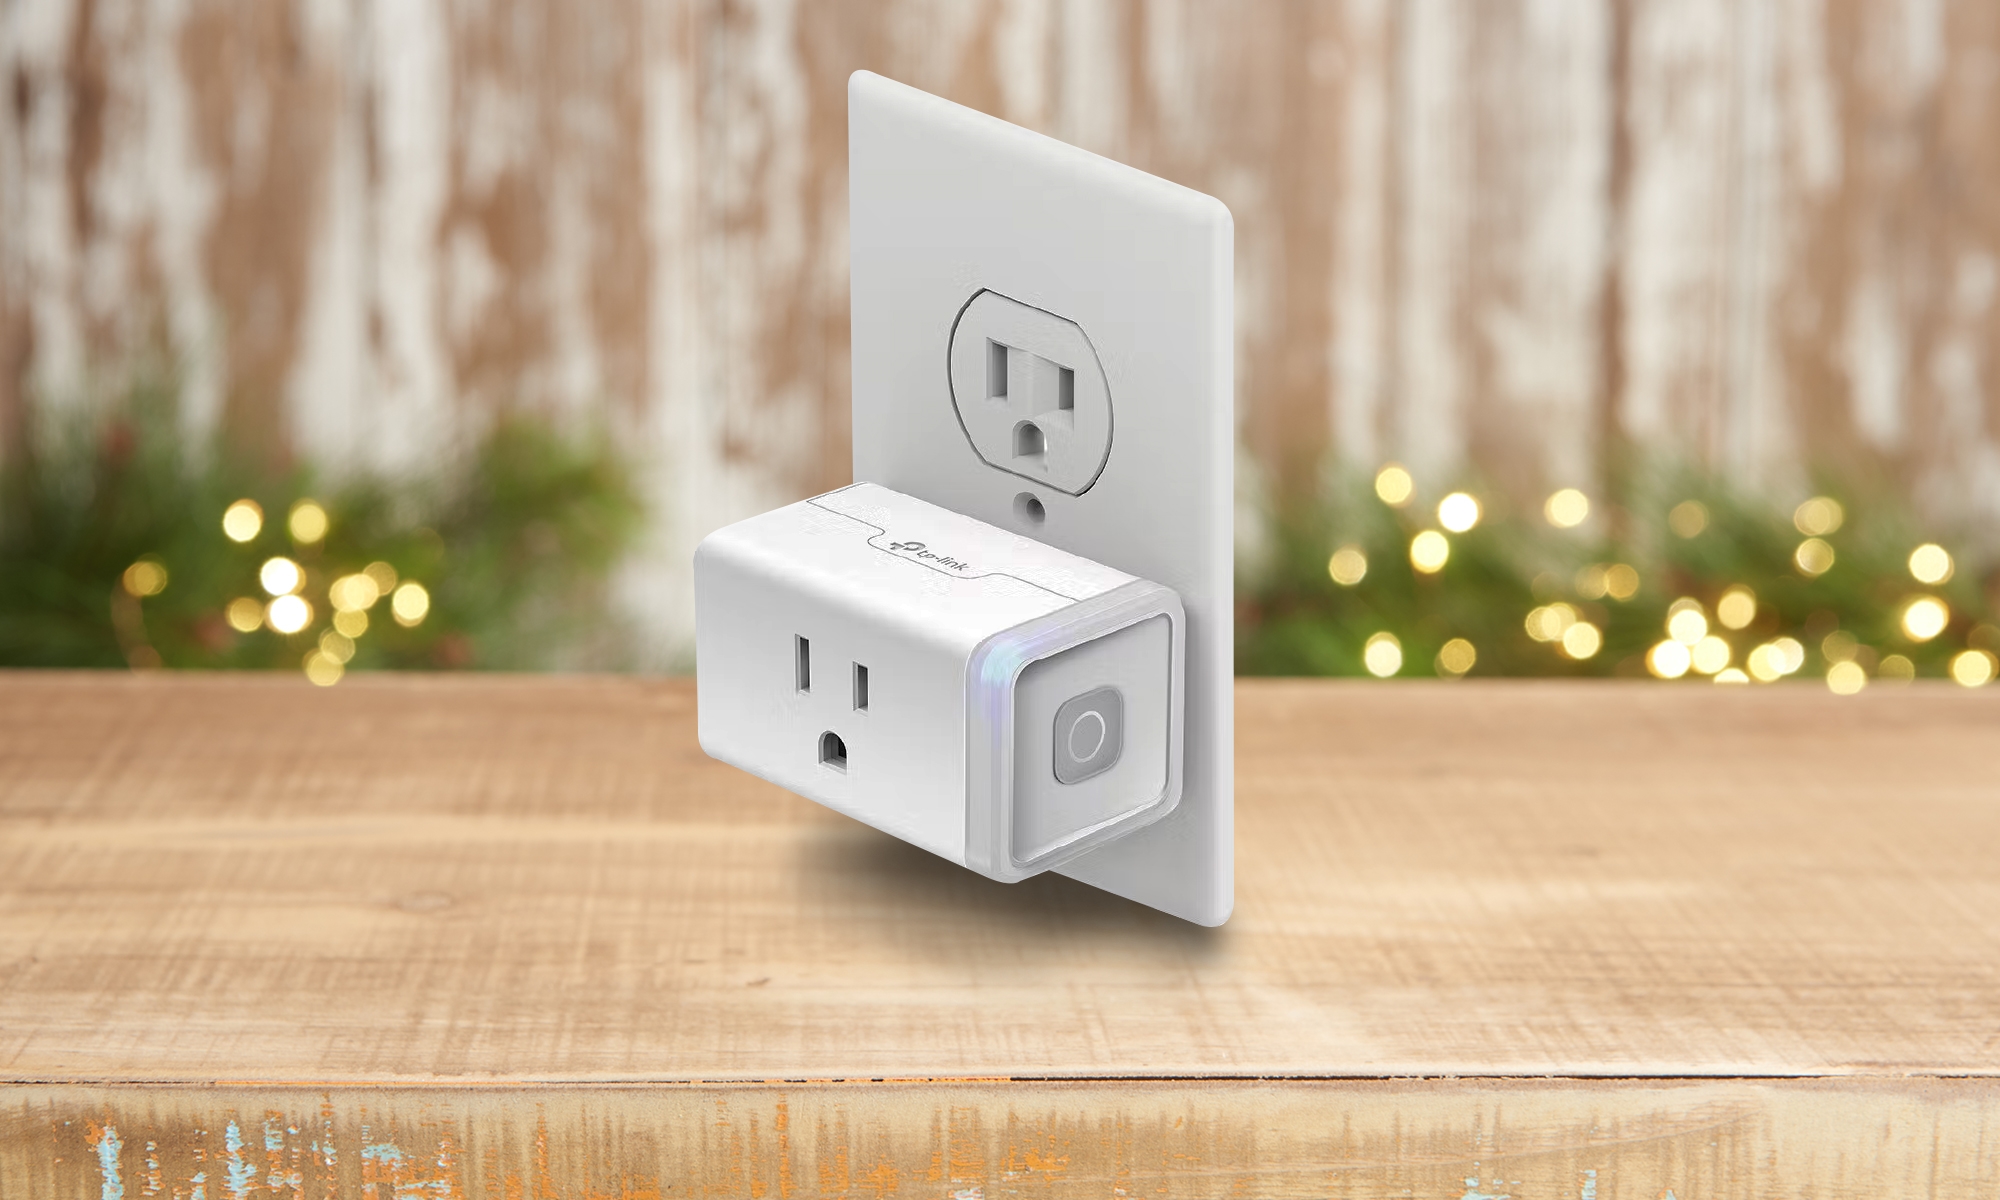 Tech gifts under $50 that make great stocking stuffers in 2022 | DeviceDaily.com